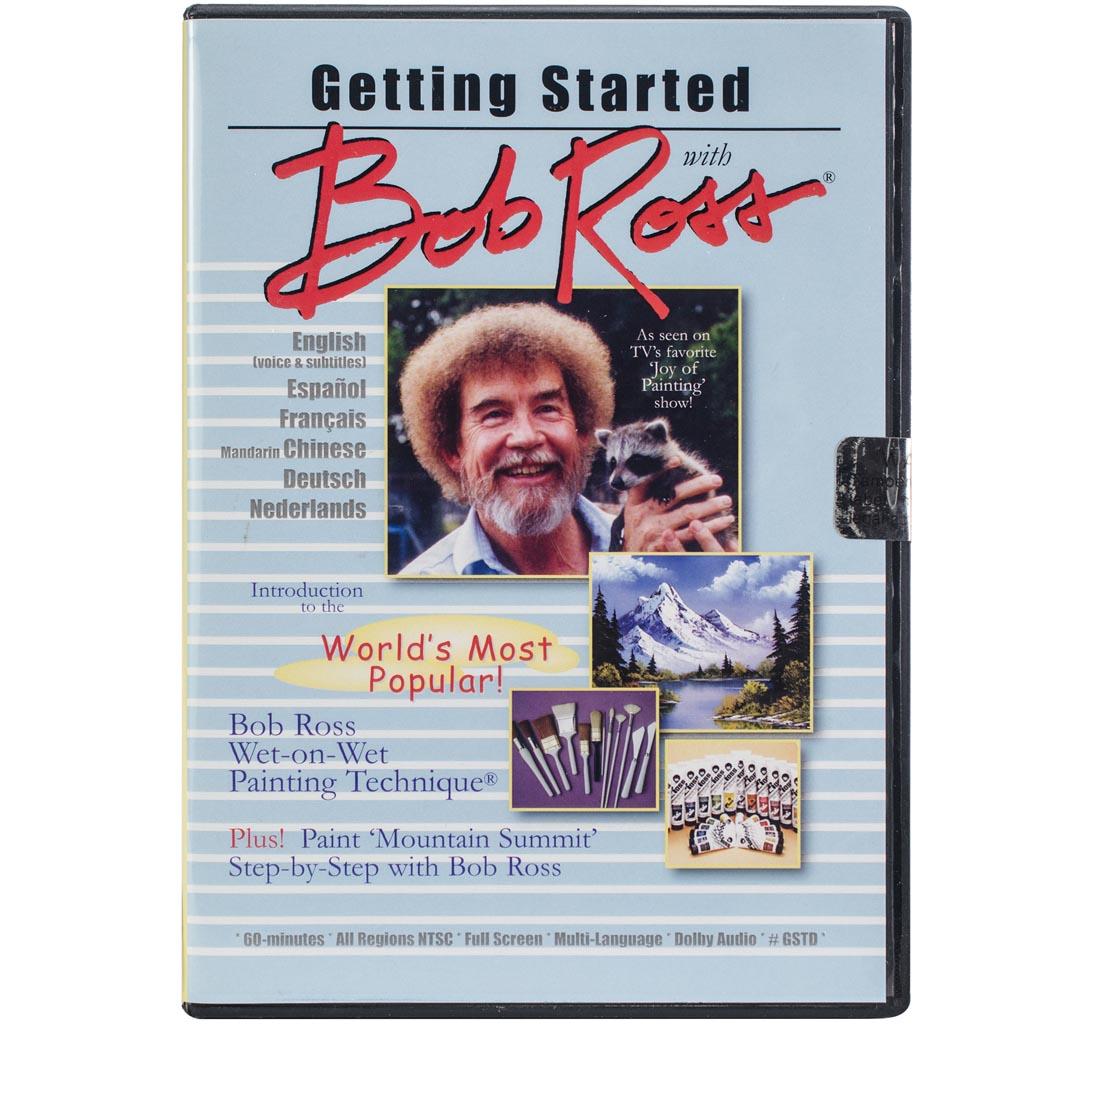 Getting Started With Bob Ross DVD